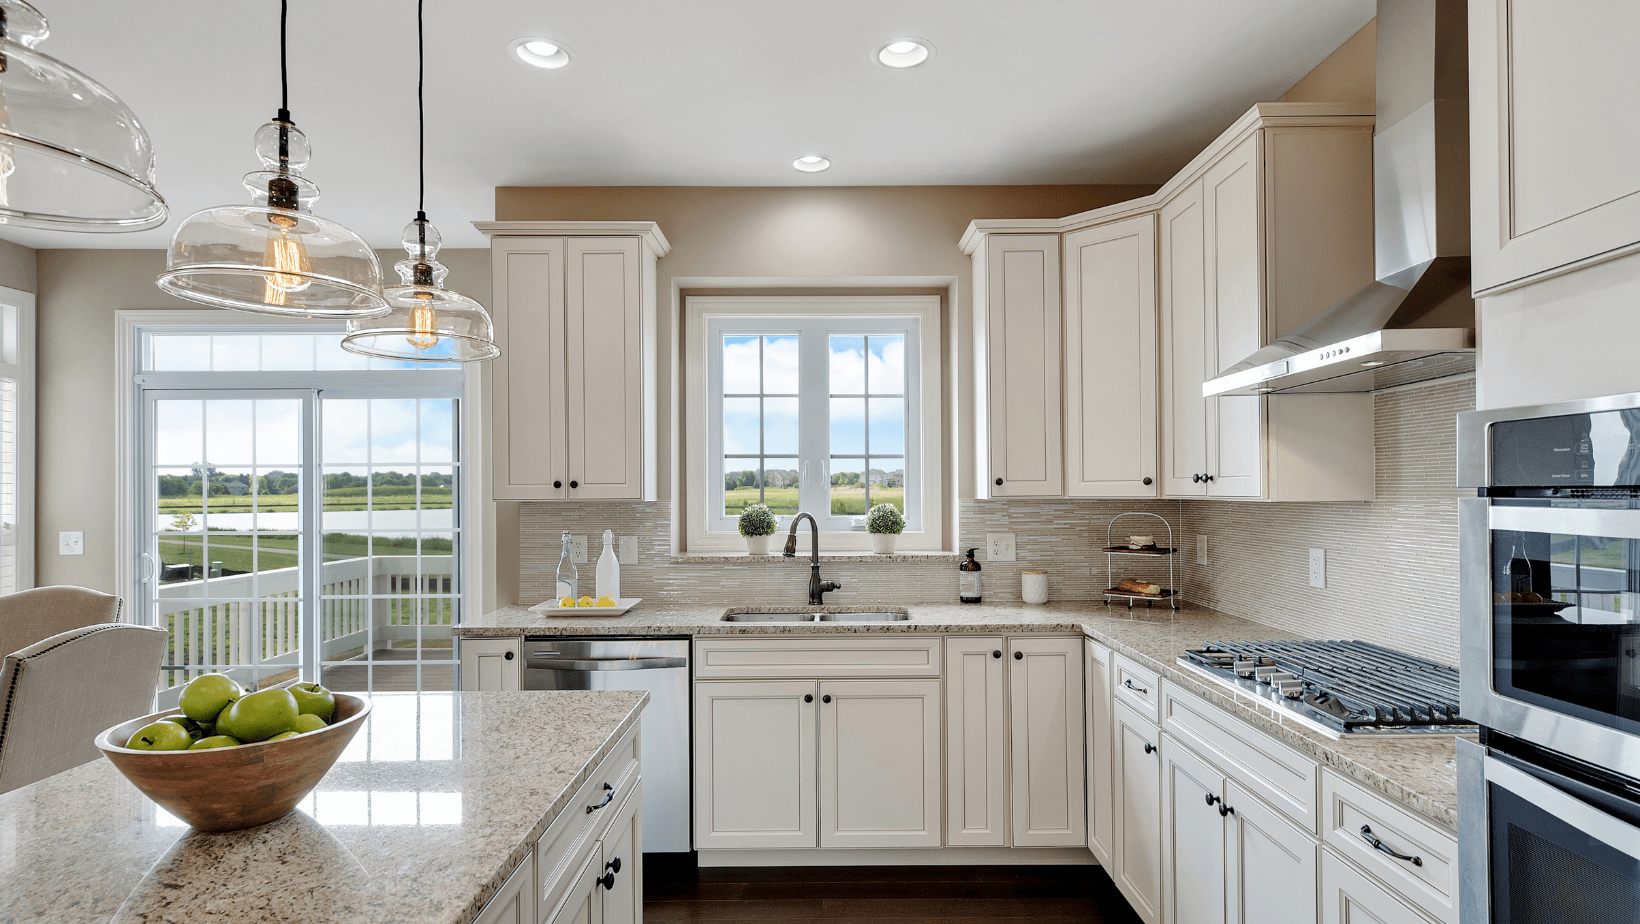 kitchen with white cabinets and light countertops lit up with recessed and hanging lights